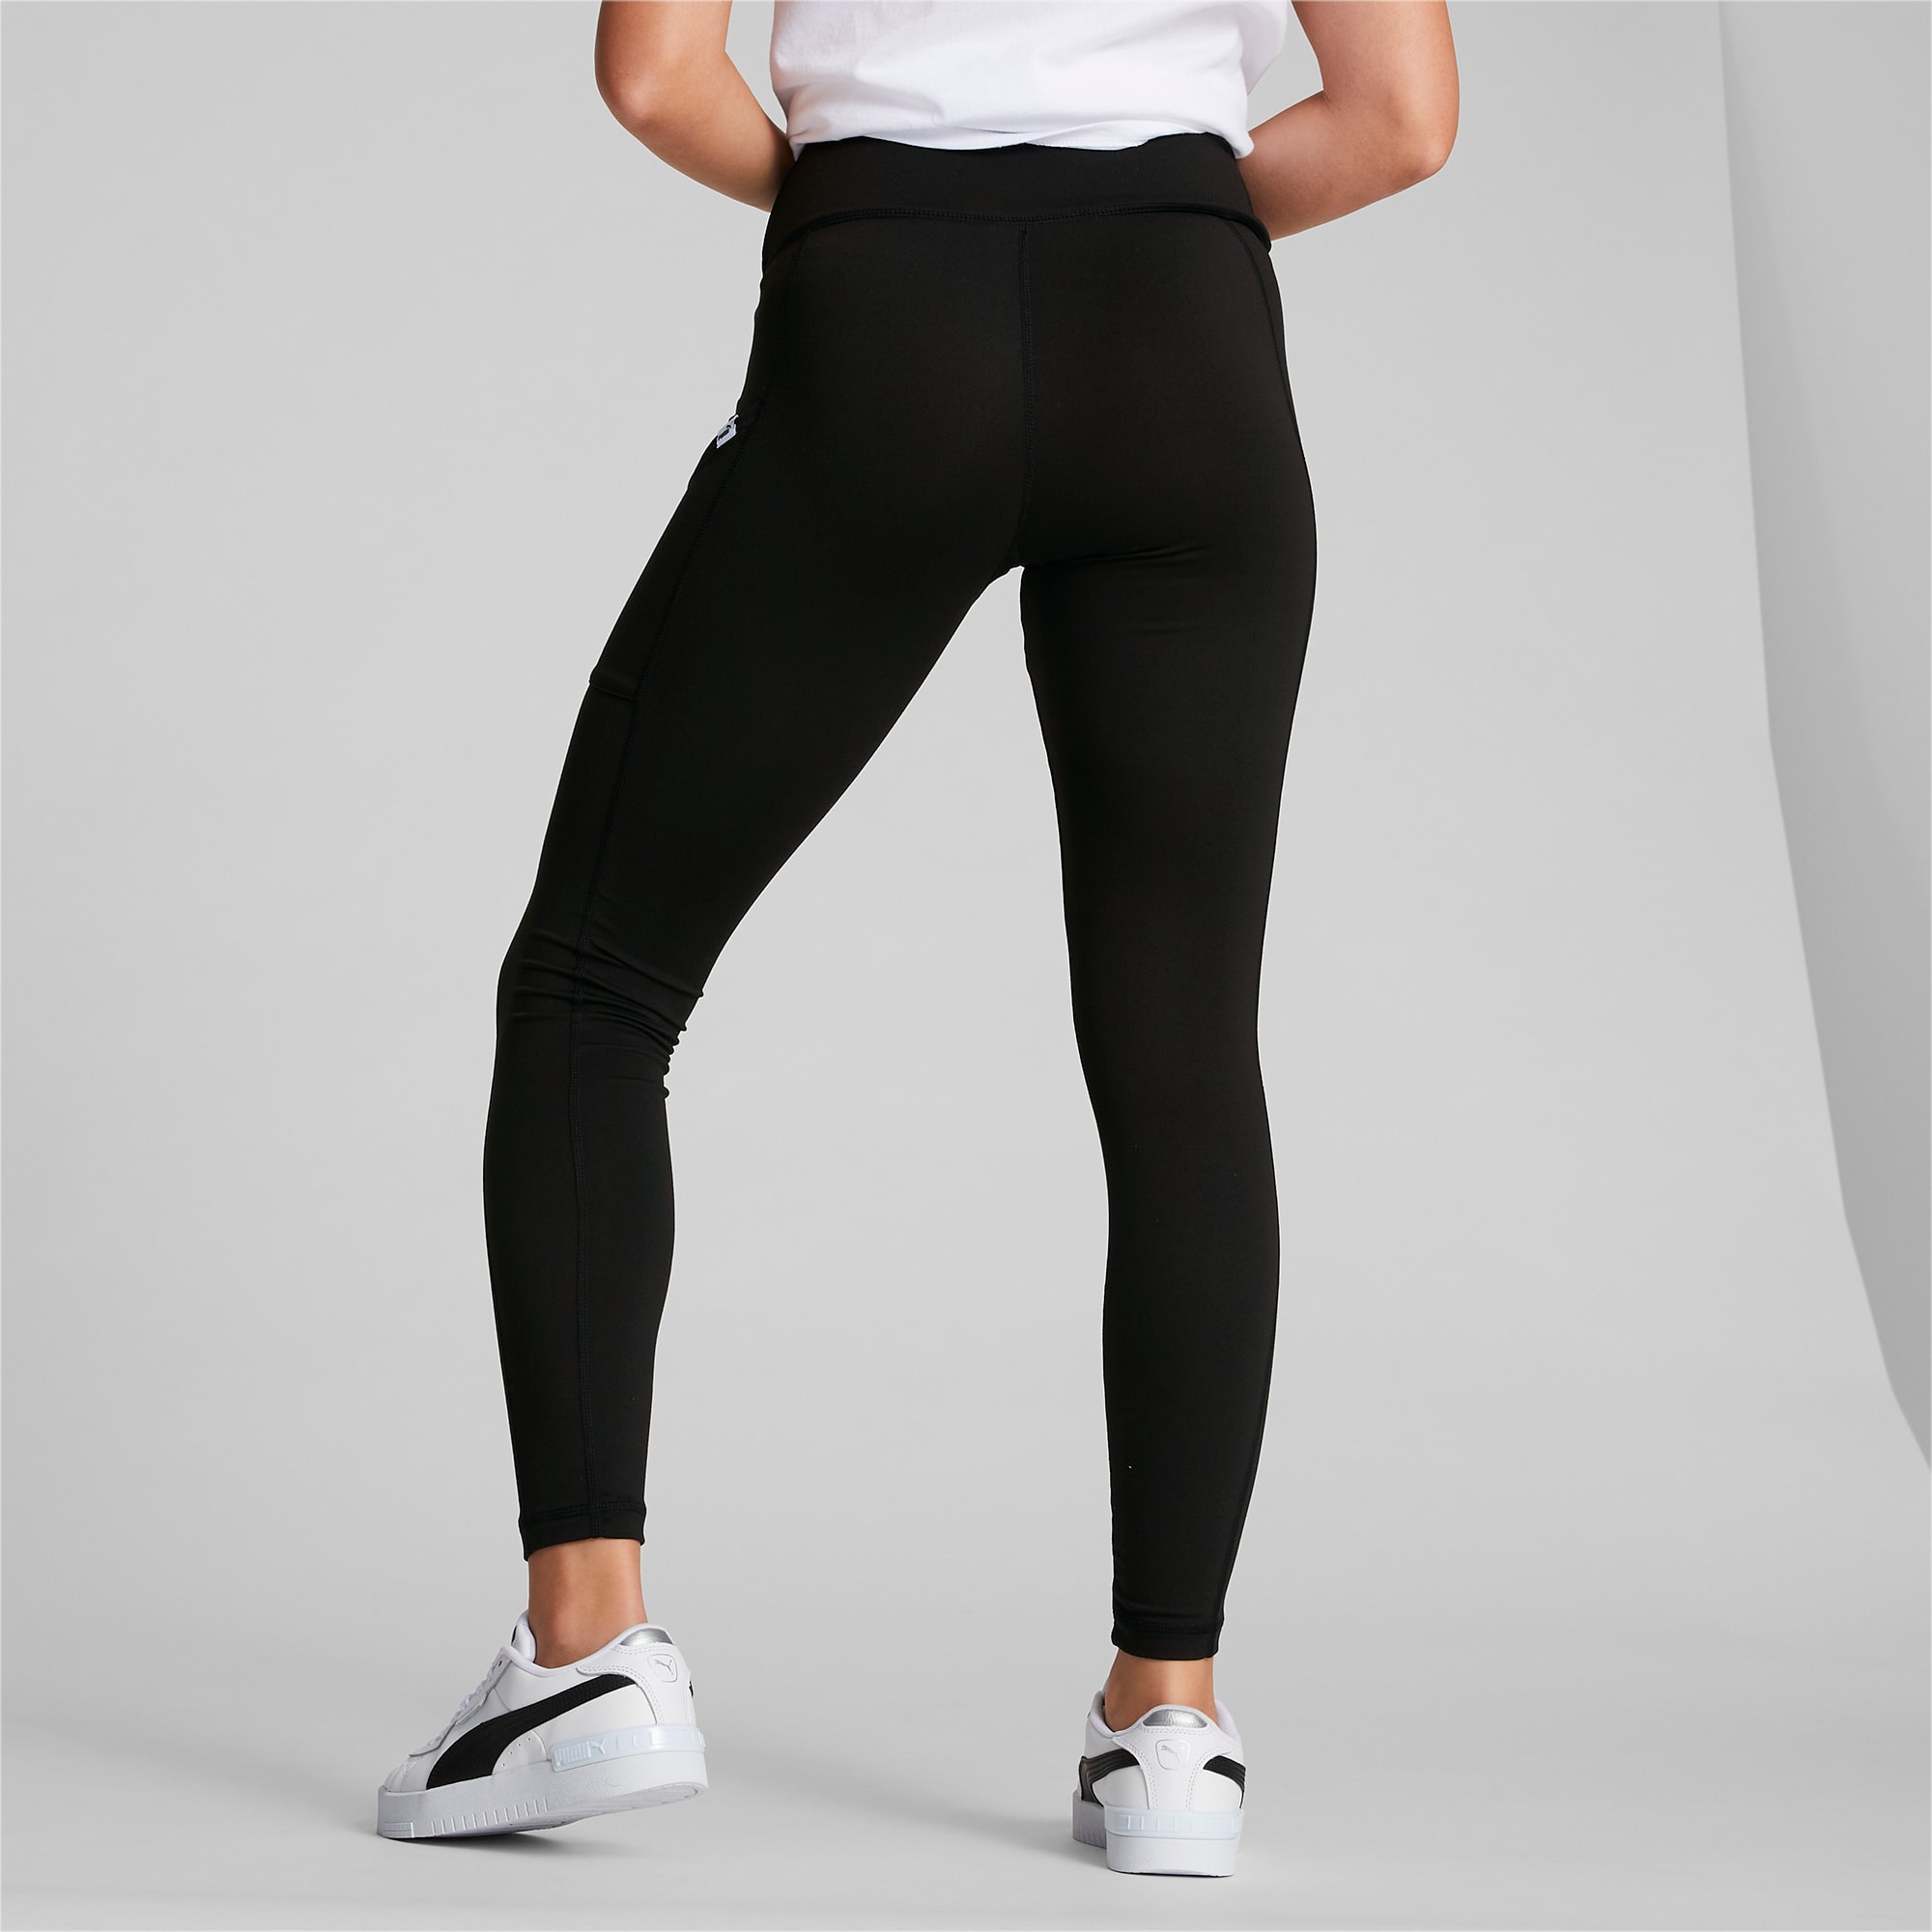 Buy Puma Leggings Strong High Waist Full (521601) puma black from £10.00  (Today) – Best Deals on